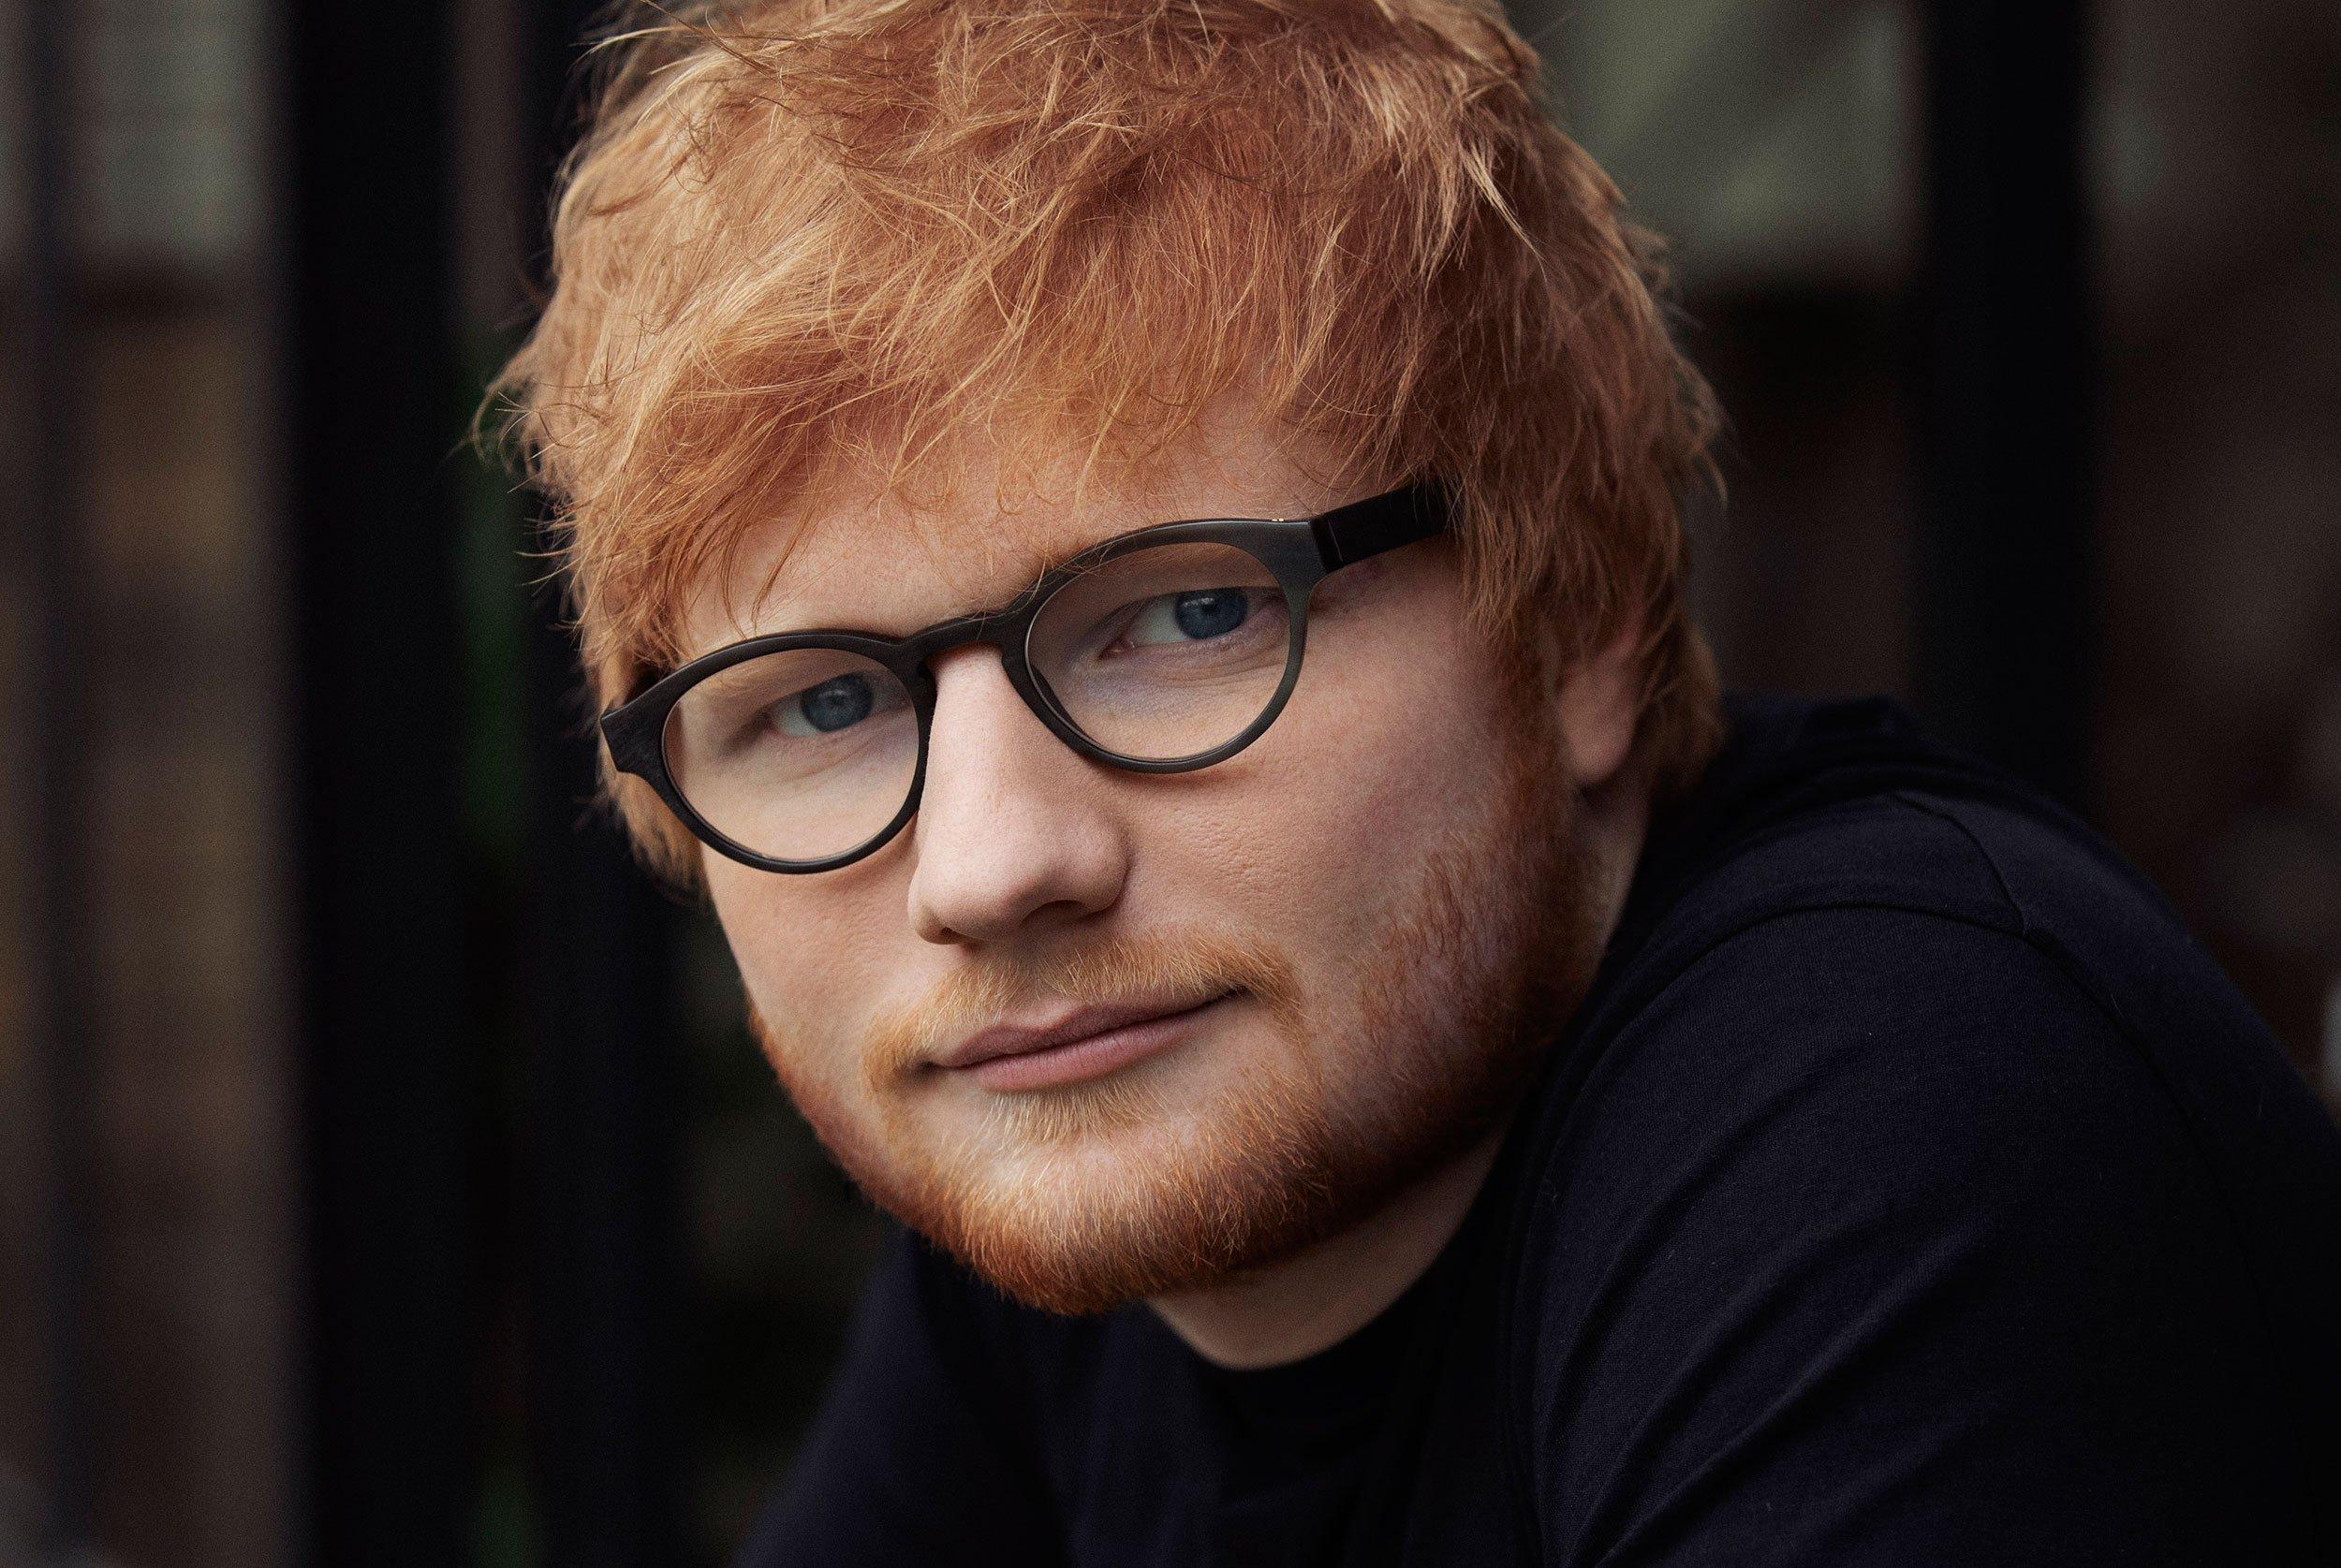 Ed Sheeran No.6 Collaborations Project Review: The Album Feels Like